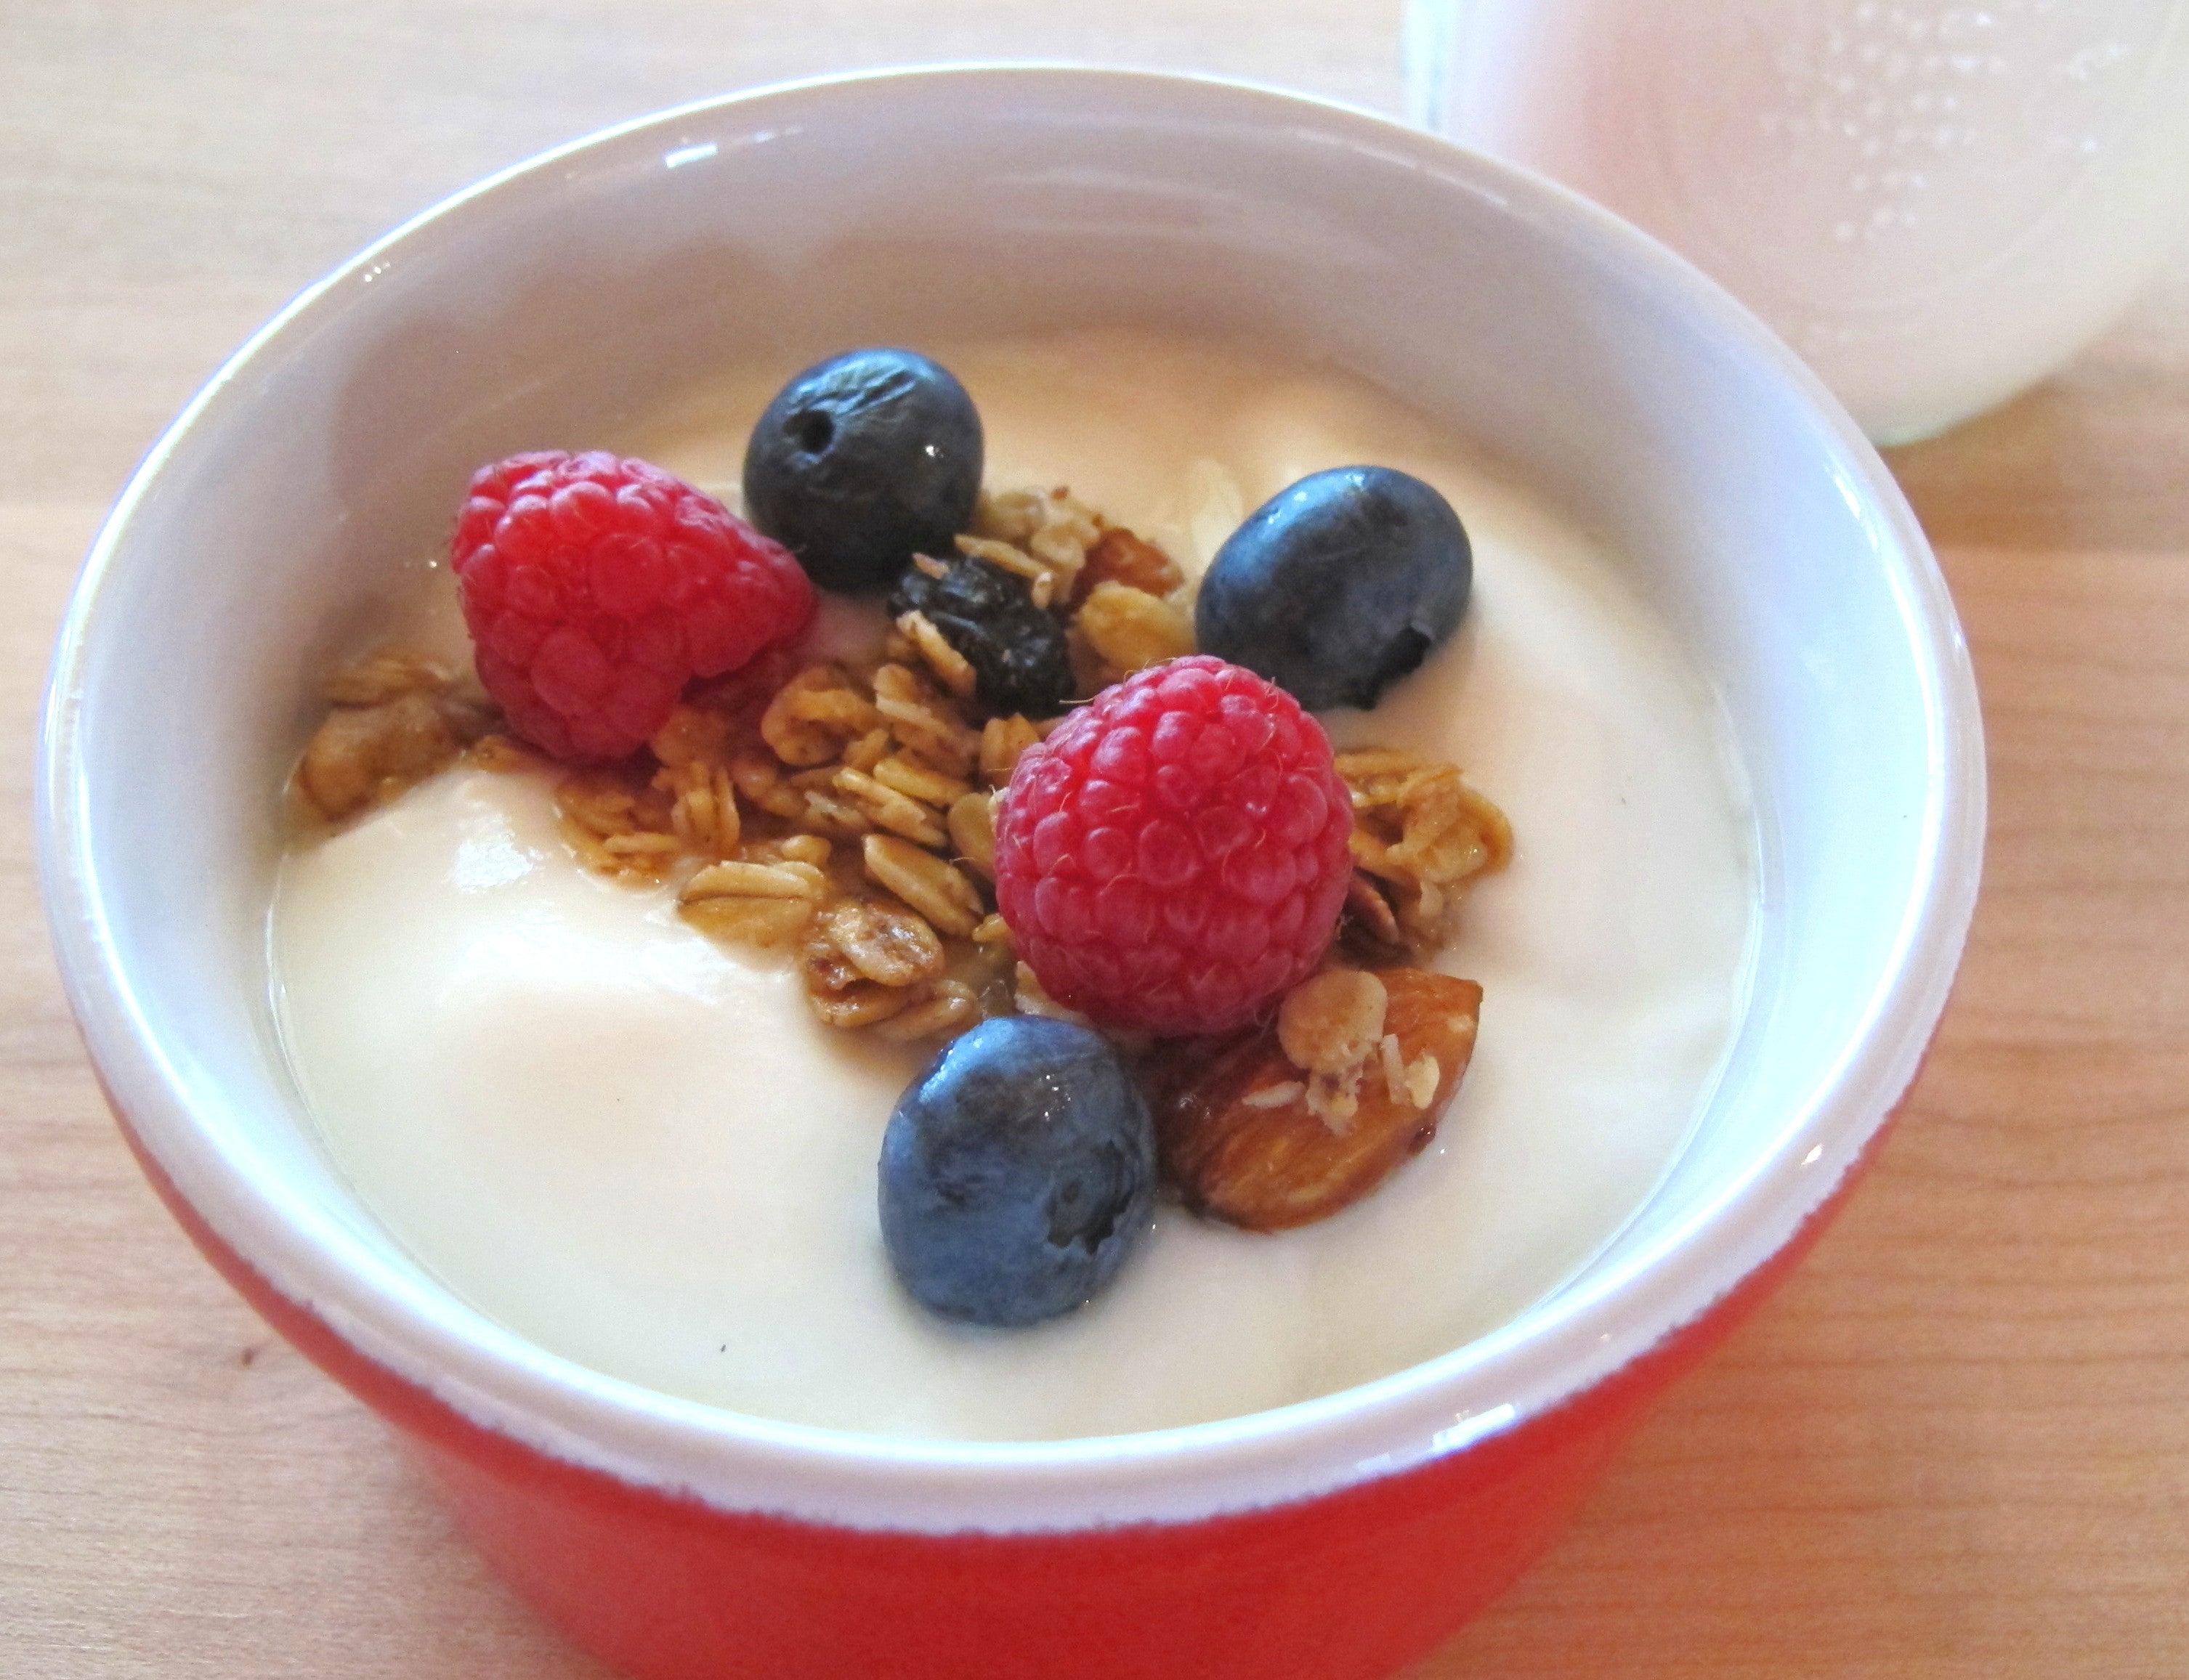 A bowl of yogurt with berries and granola